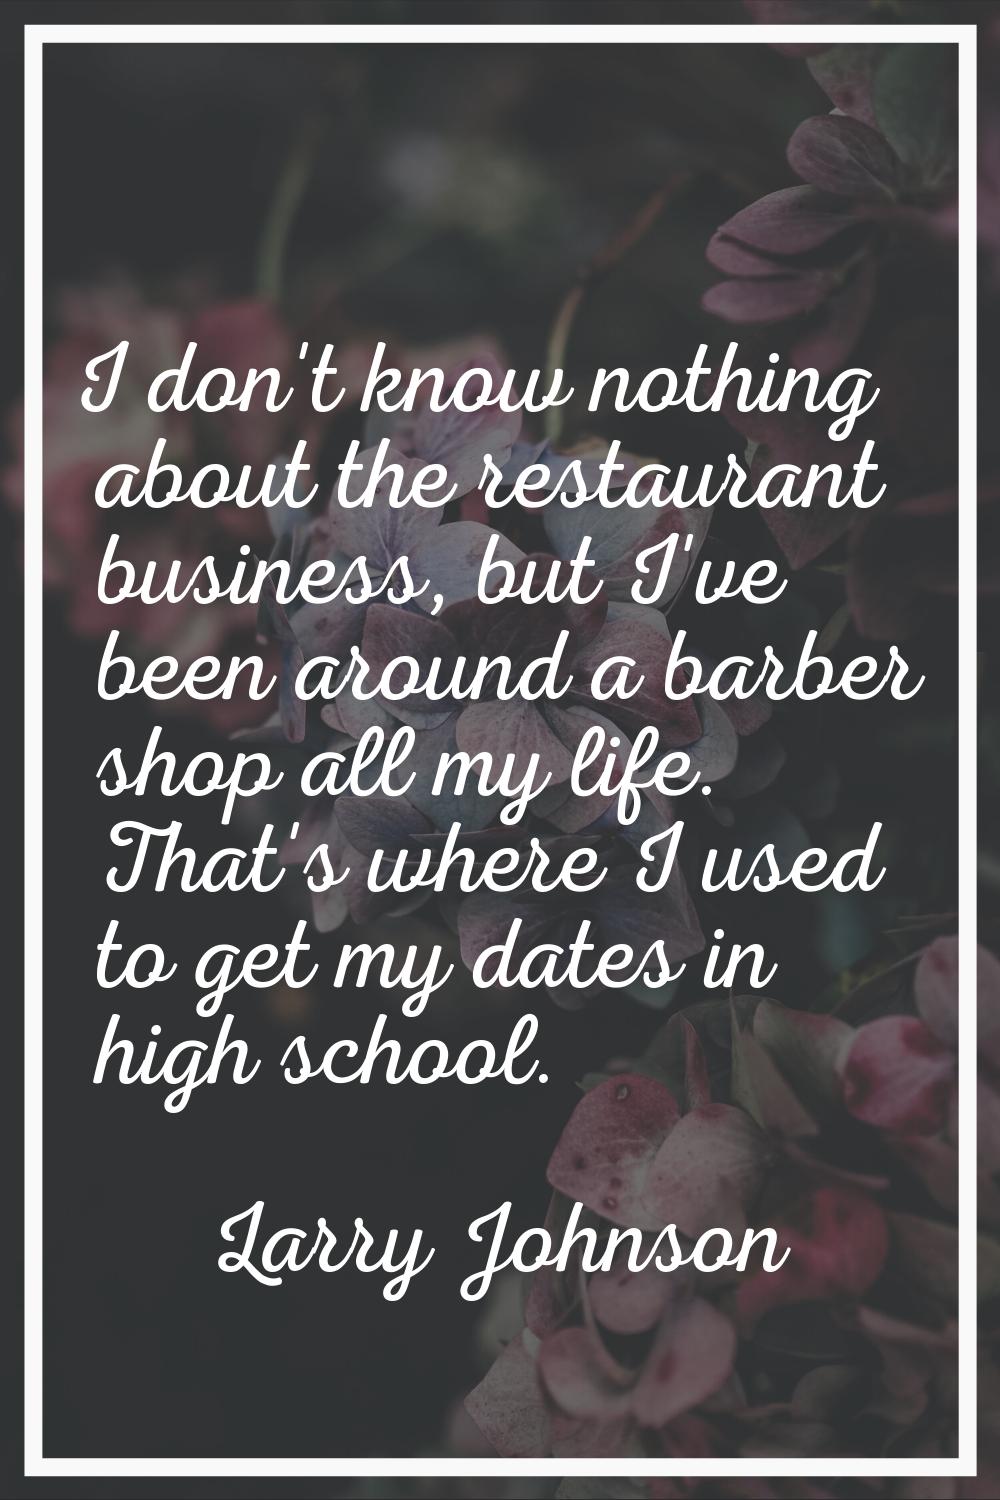 I don't know nothing about the restaurant business, but I've been around a barber shop all my life.